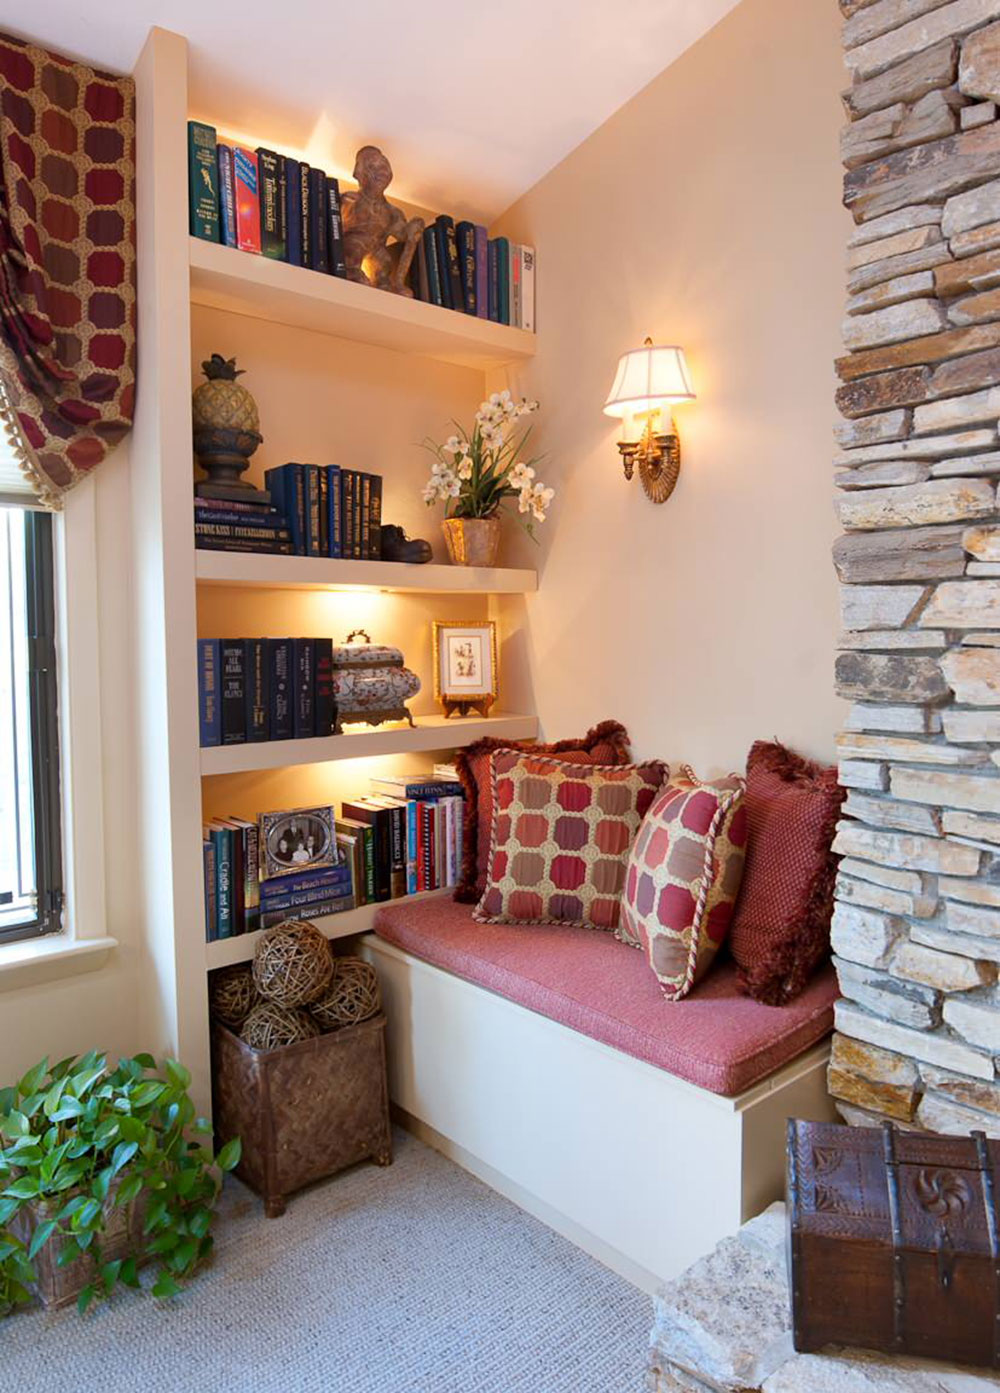 How To Design A Reading Nook For Poetic Moments4